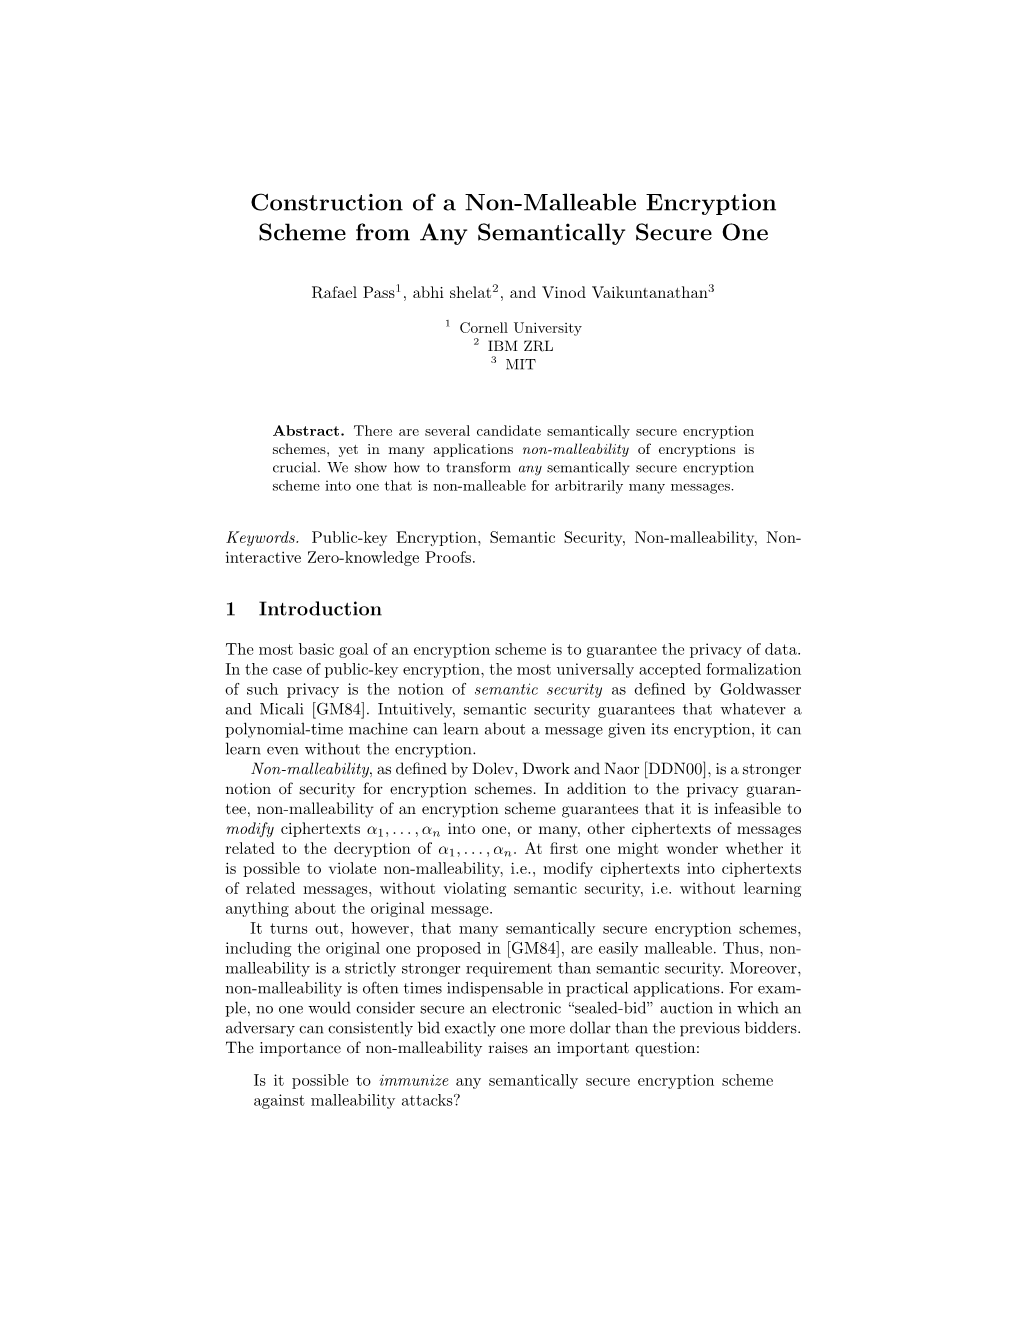 Construction of a Non-Malleable Encryption Scheme from Any Semantically Secure One